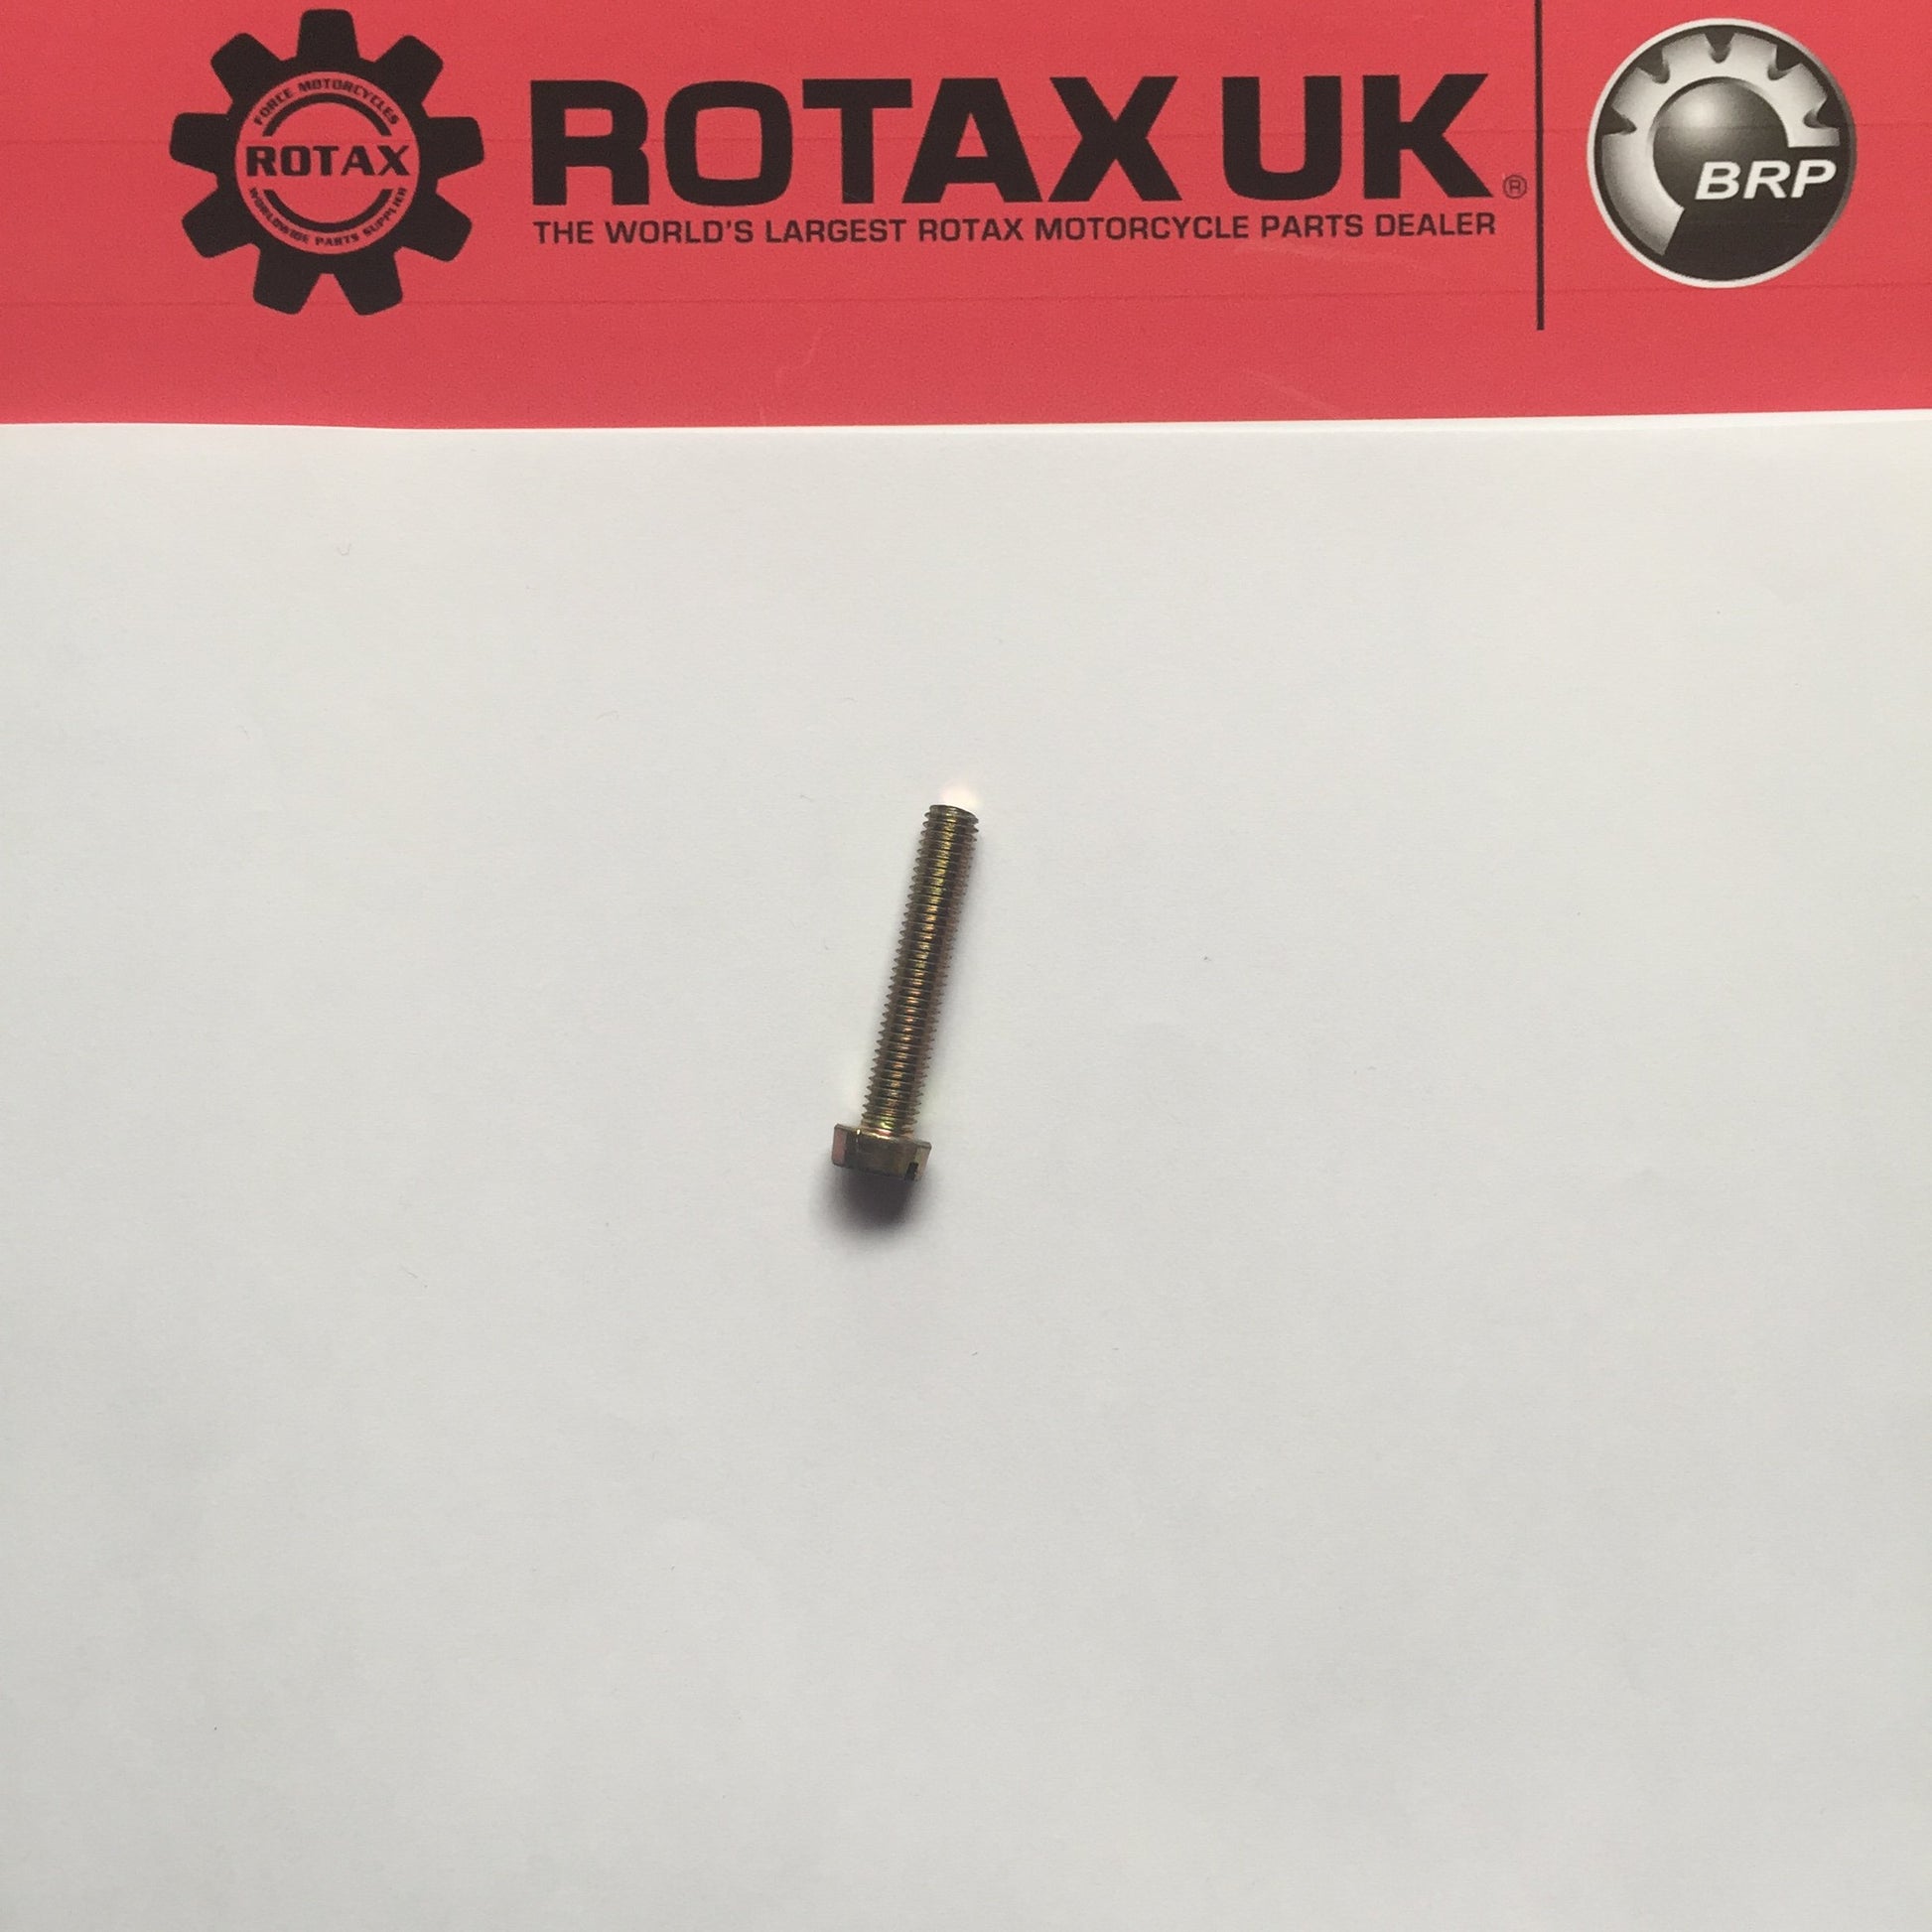 240975 - Screw M5x28mm - Slot Head for engine types: 128, 247, 256, 258, 503.